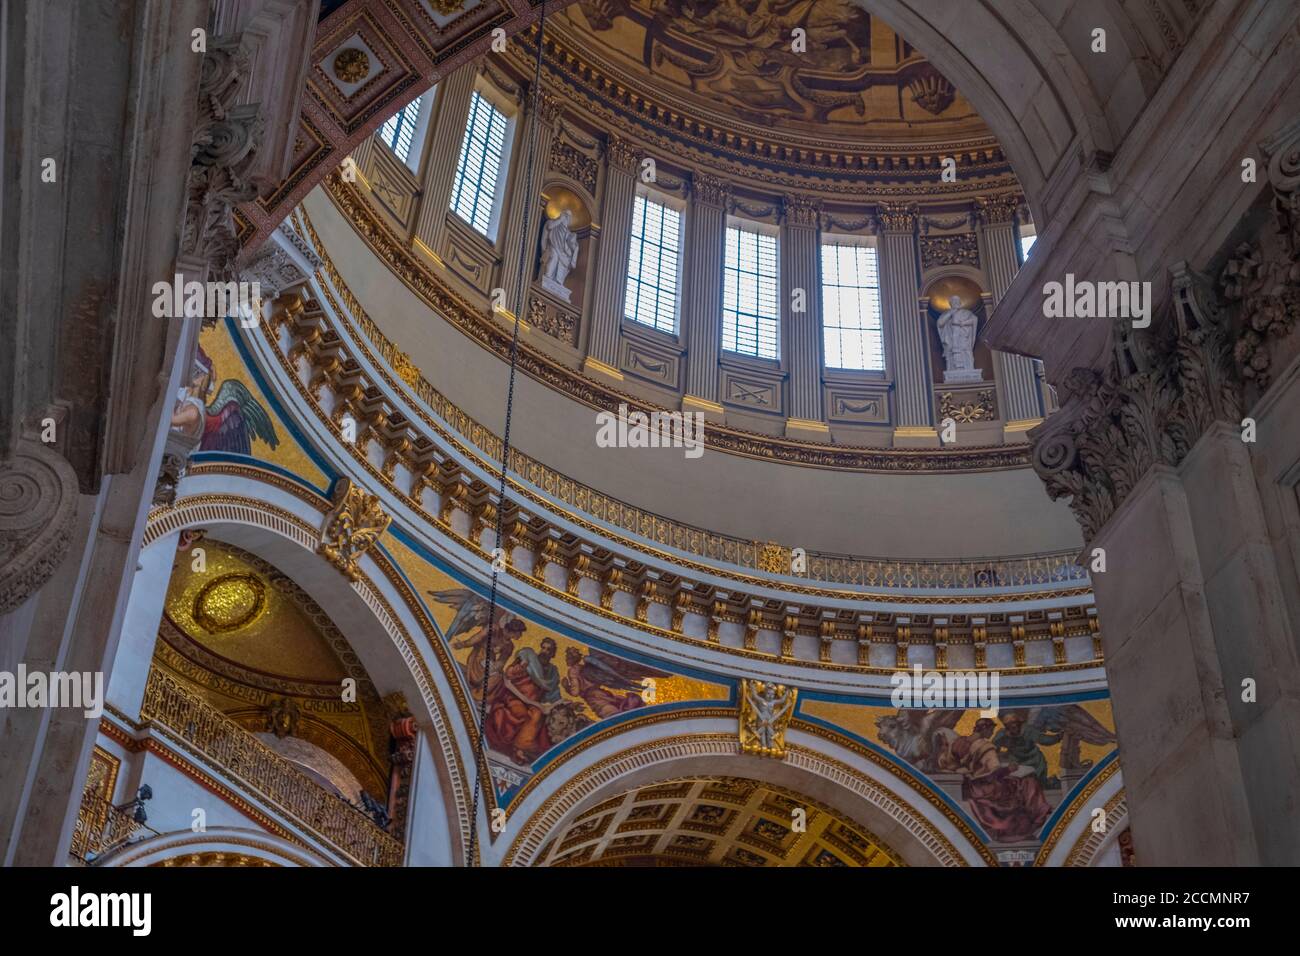 Looking up into the Dome and painted ceilings of St Pauls Cathedral in central London Stock Photo